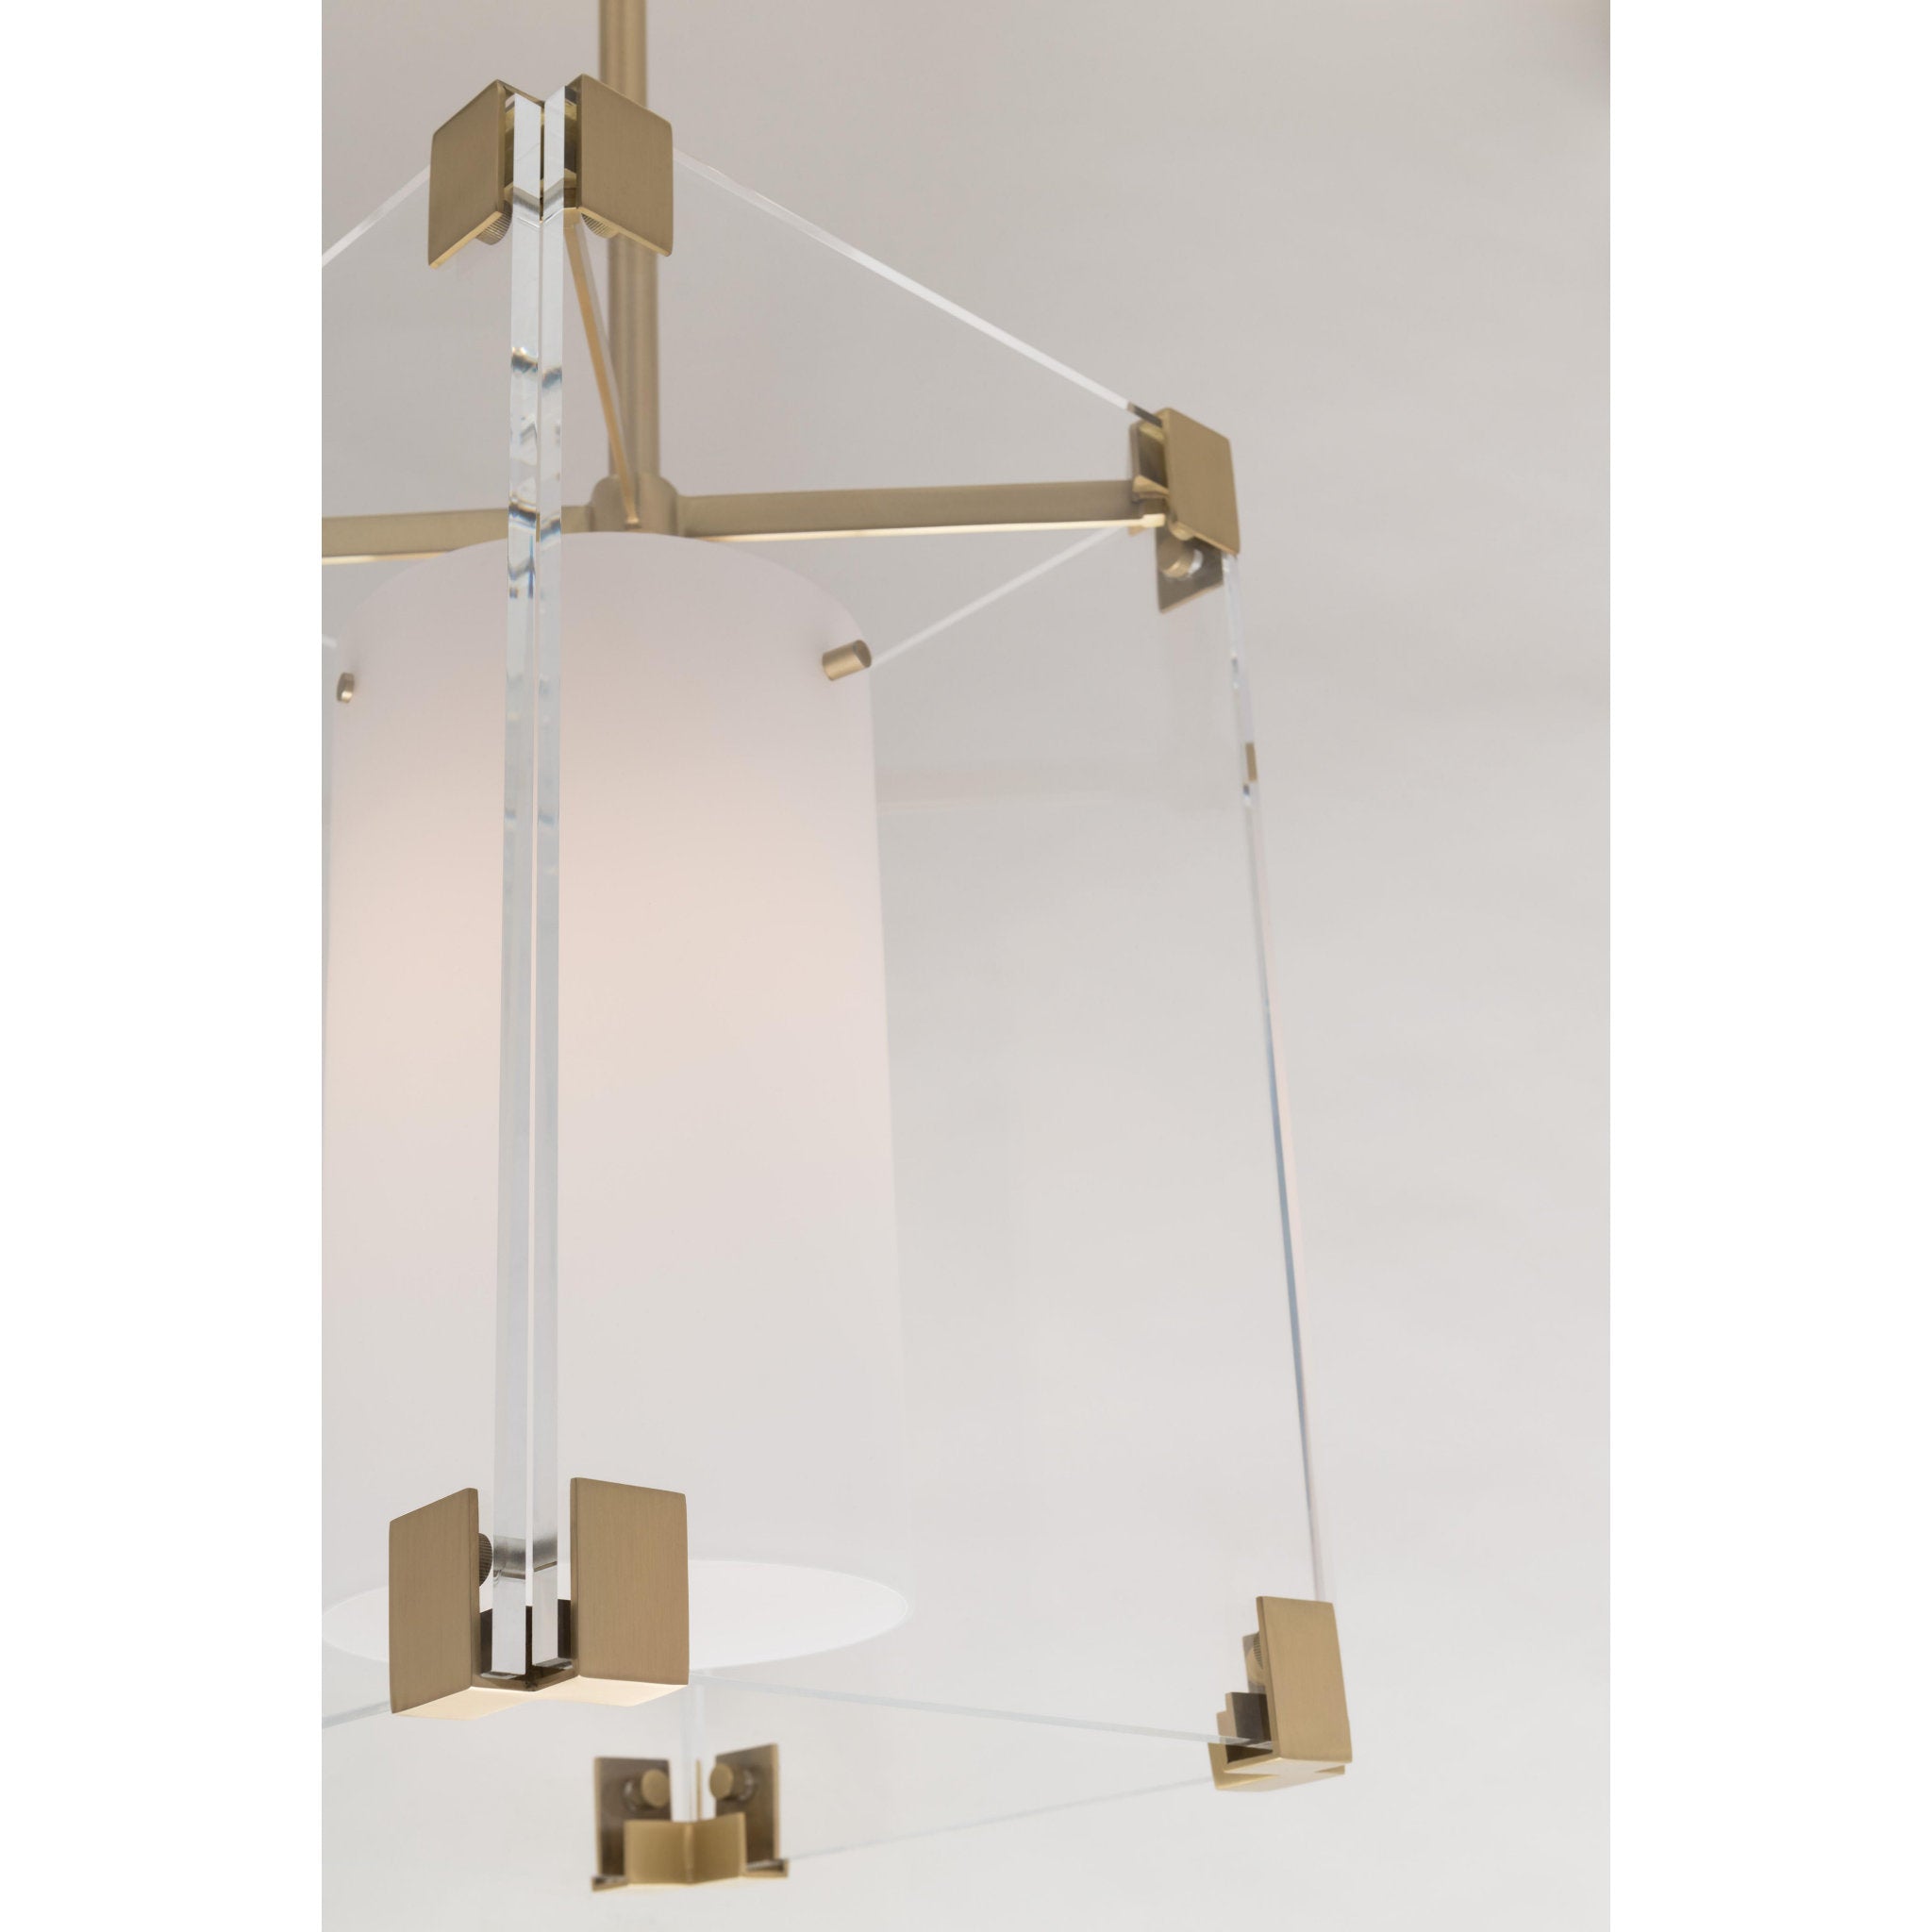 Achilles 3 Light Linear in Polished Nickel